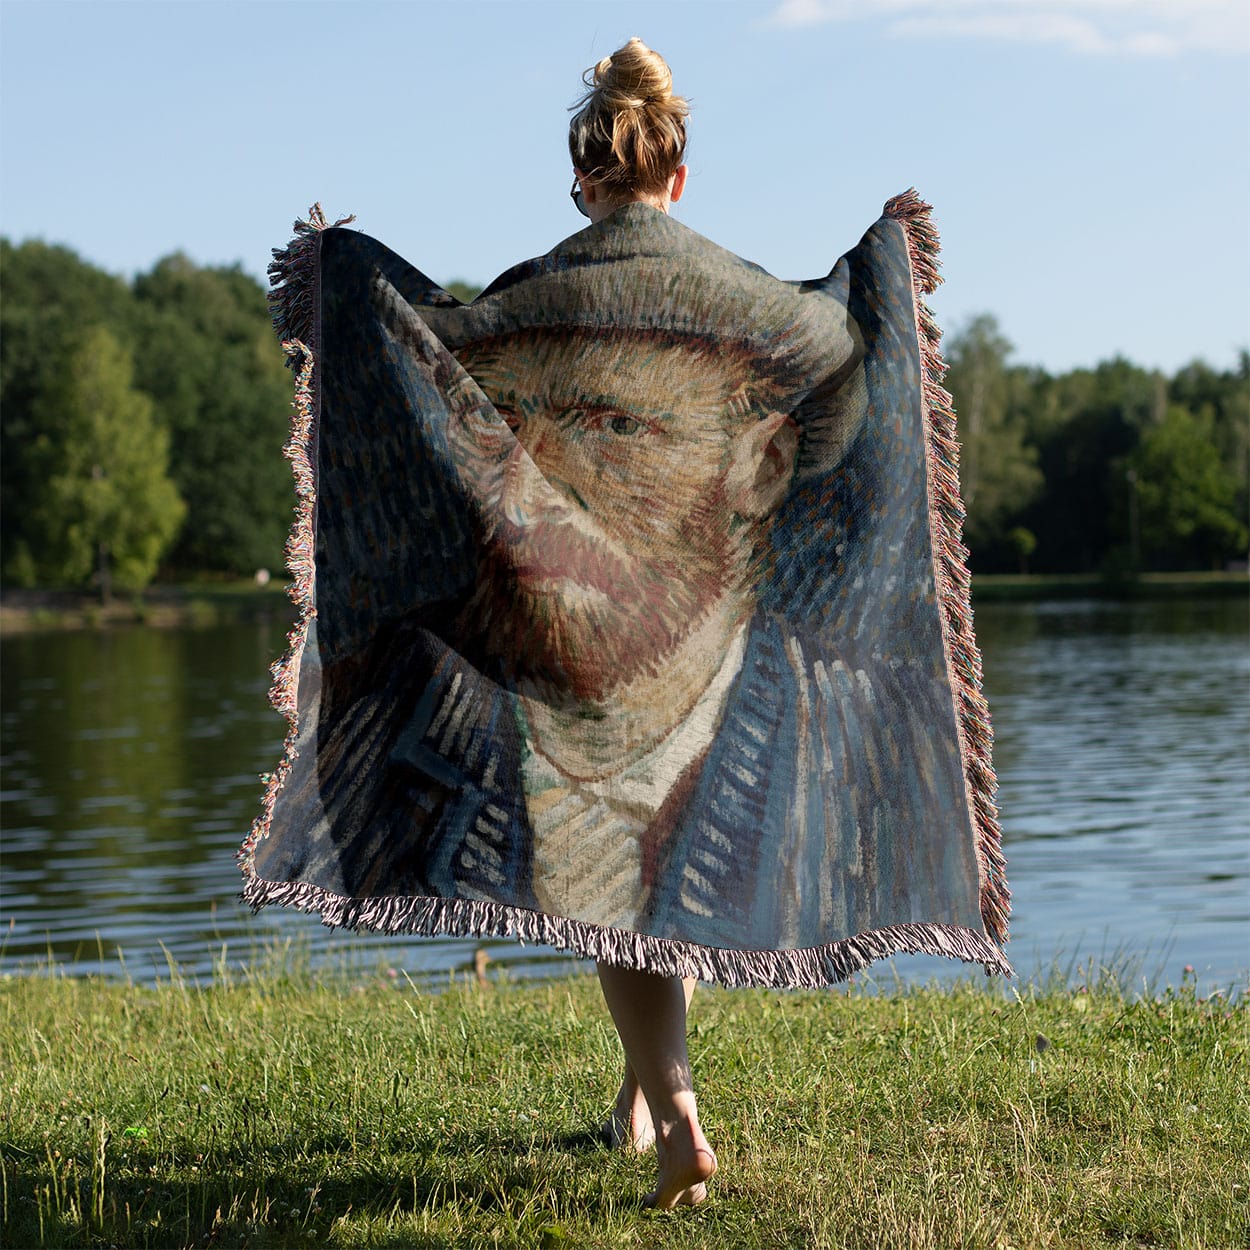 Cool van Gogh Woven Blanket Held on a Woman's Back Outside